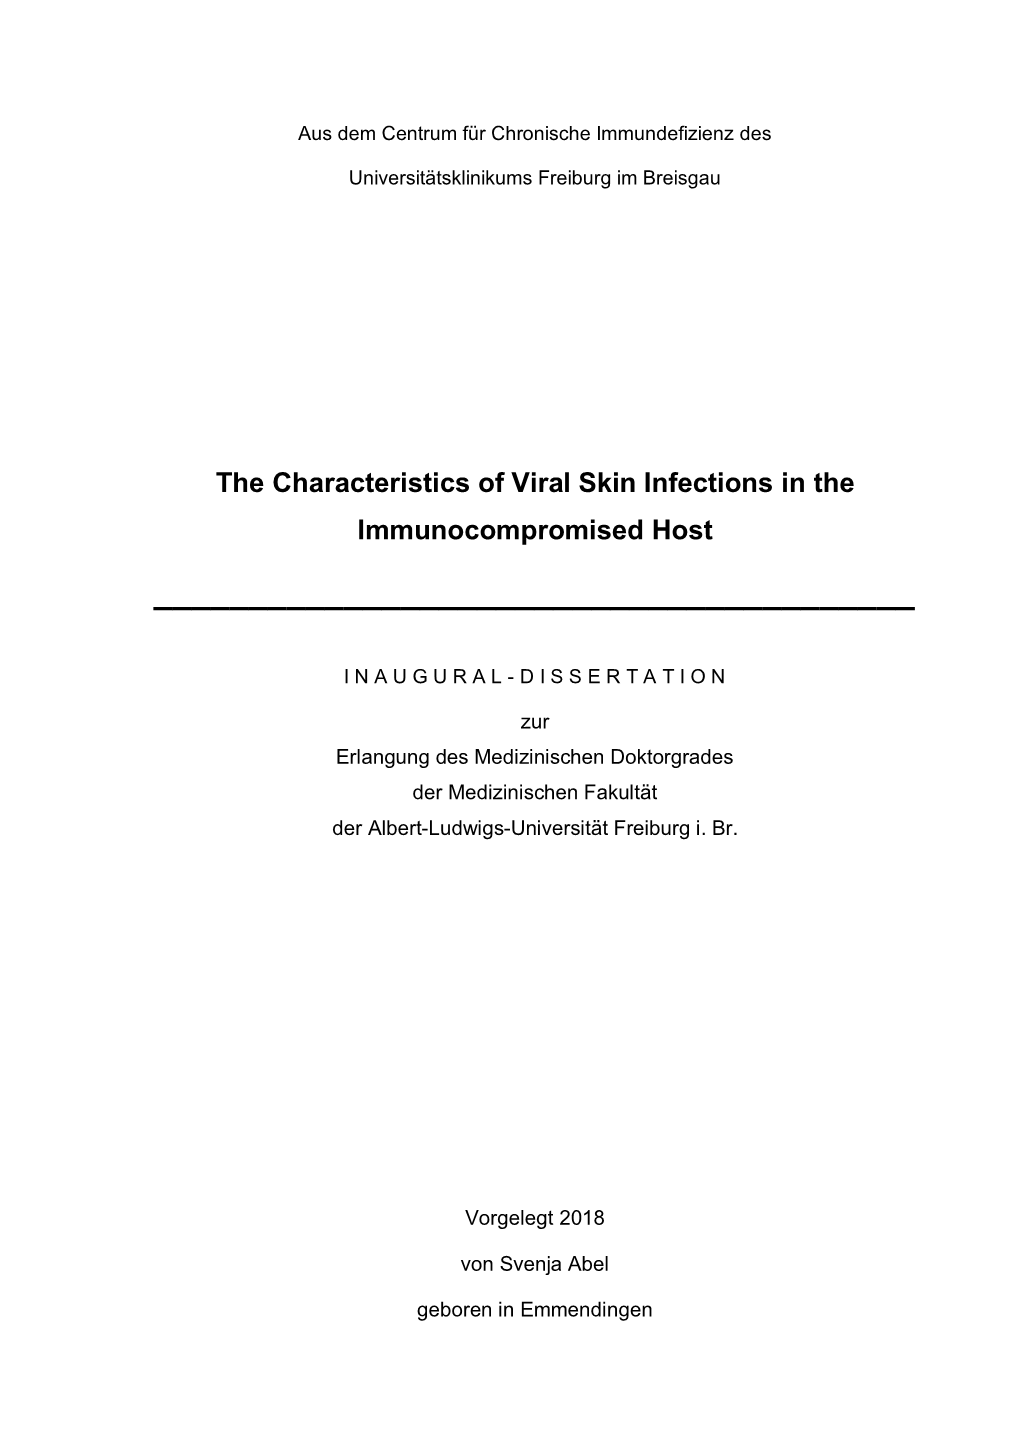 The Characteristics of Viral Skin Infections in the Immunocompromised Host ______